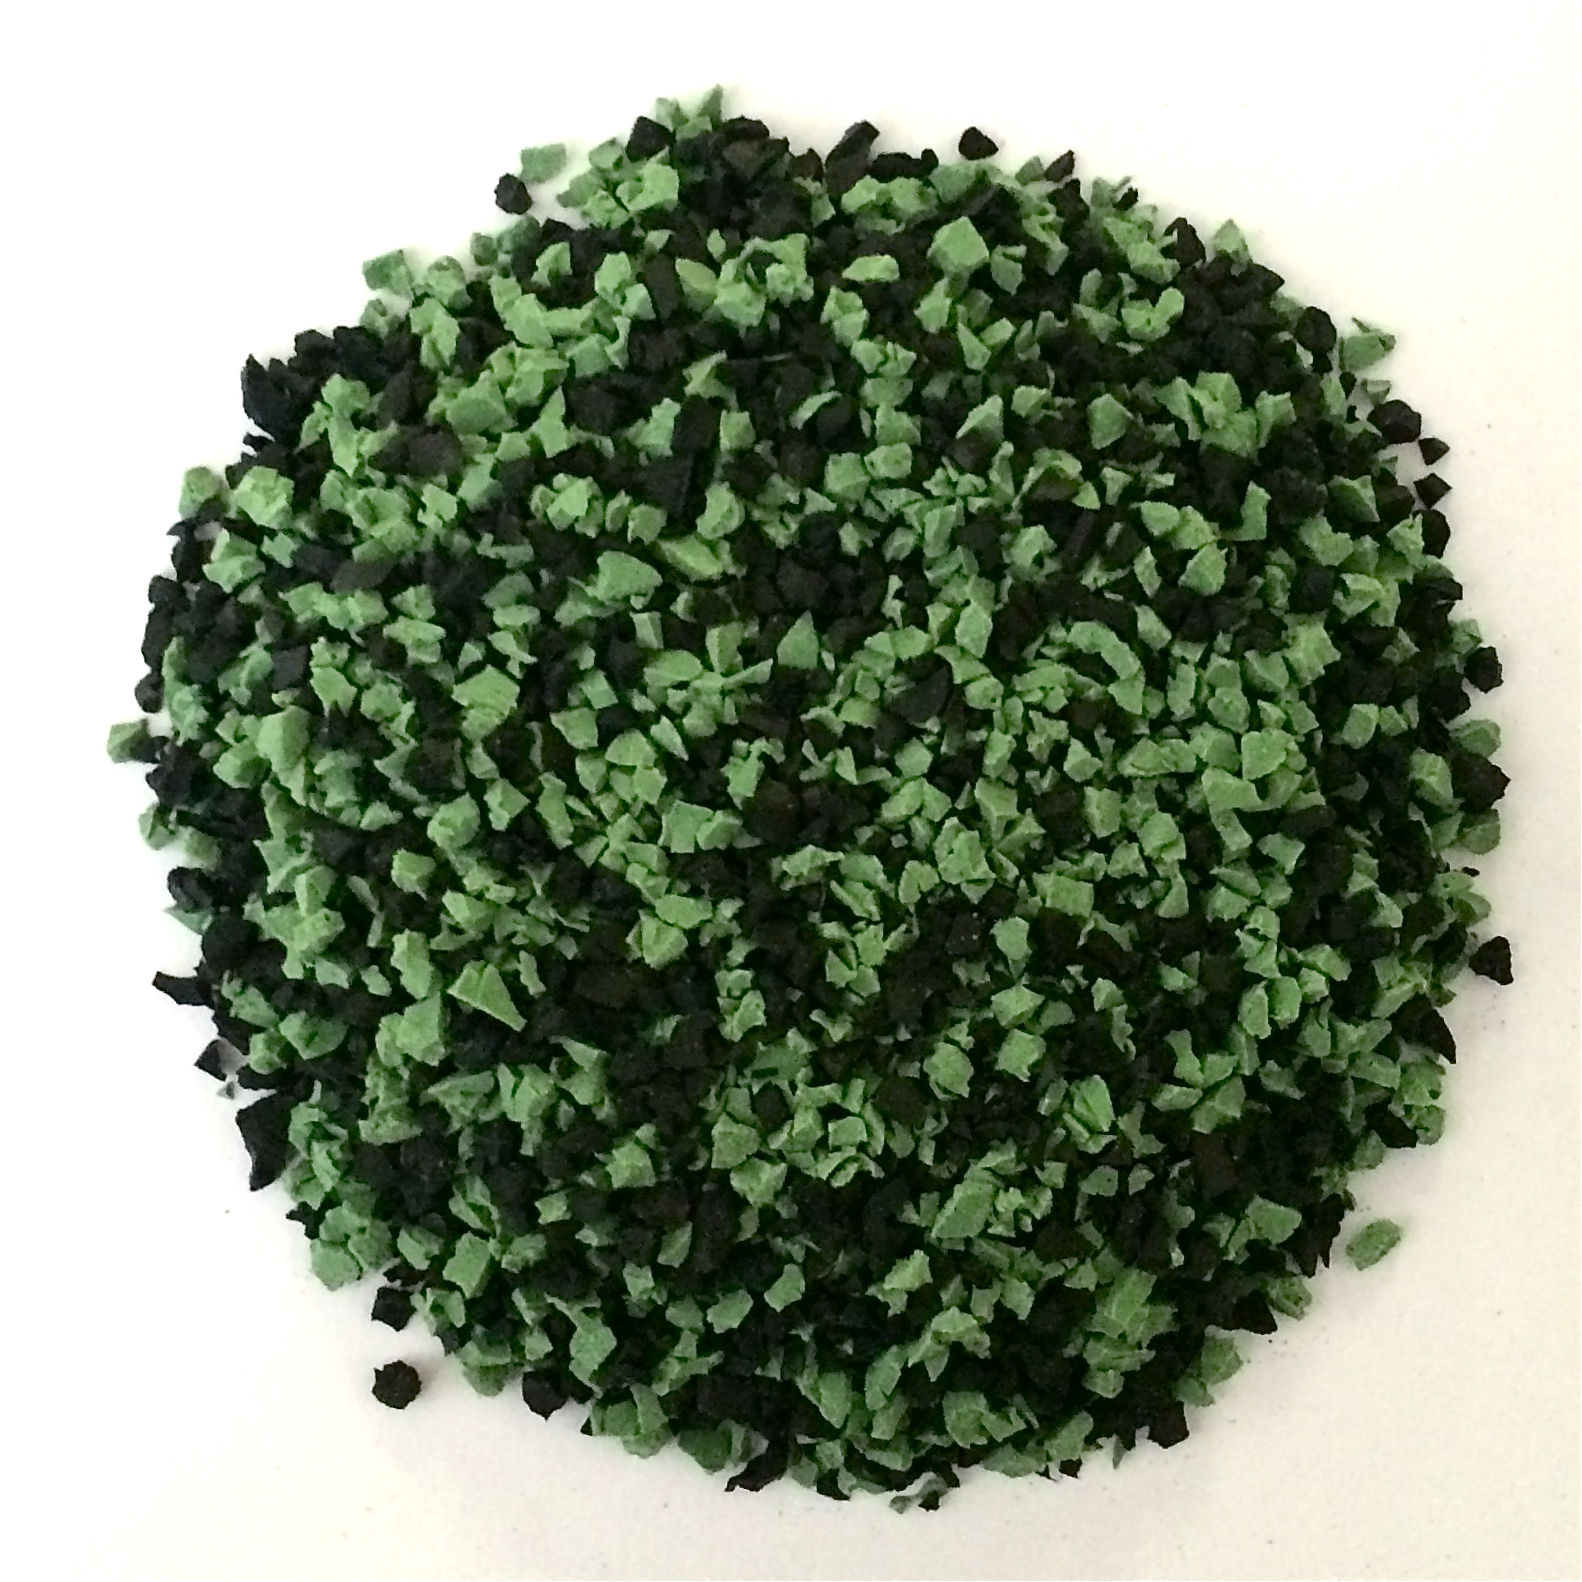 green and black poured in place rubber repair patch kit